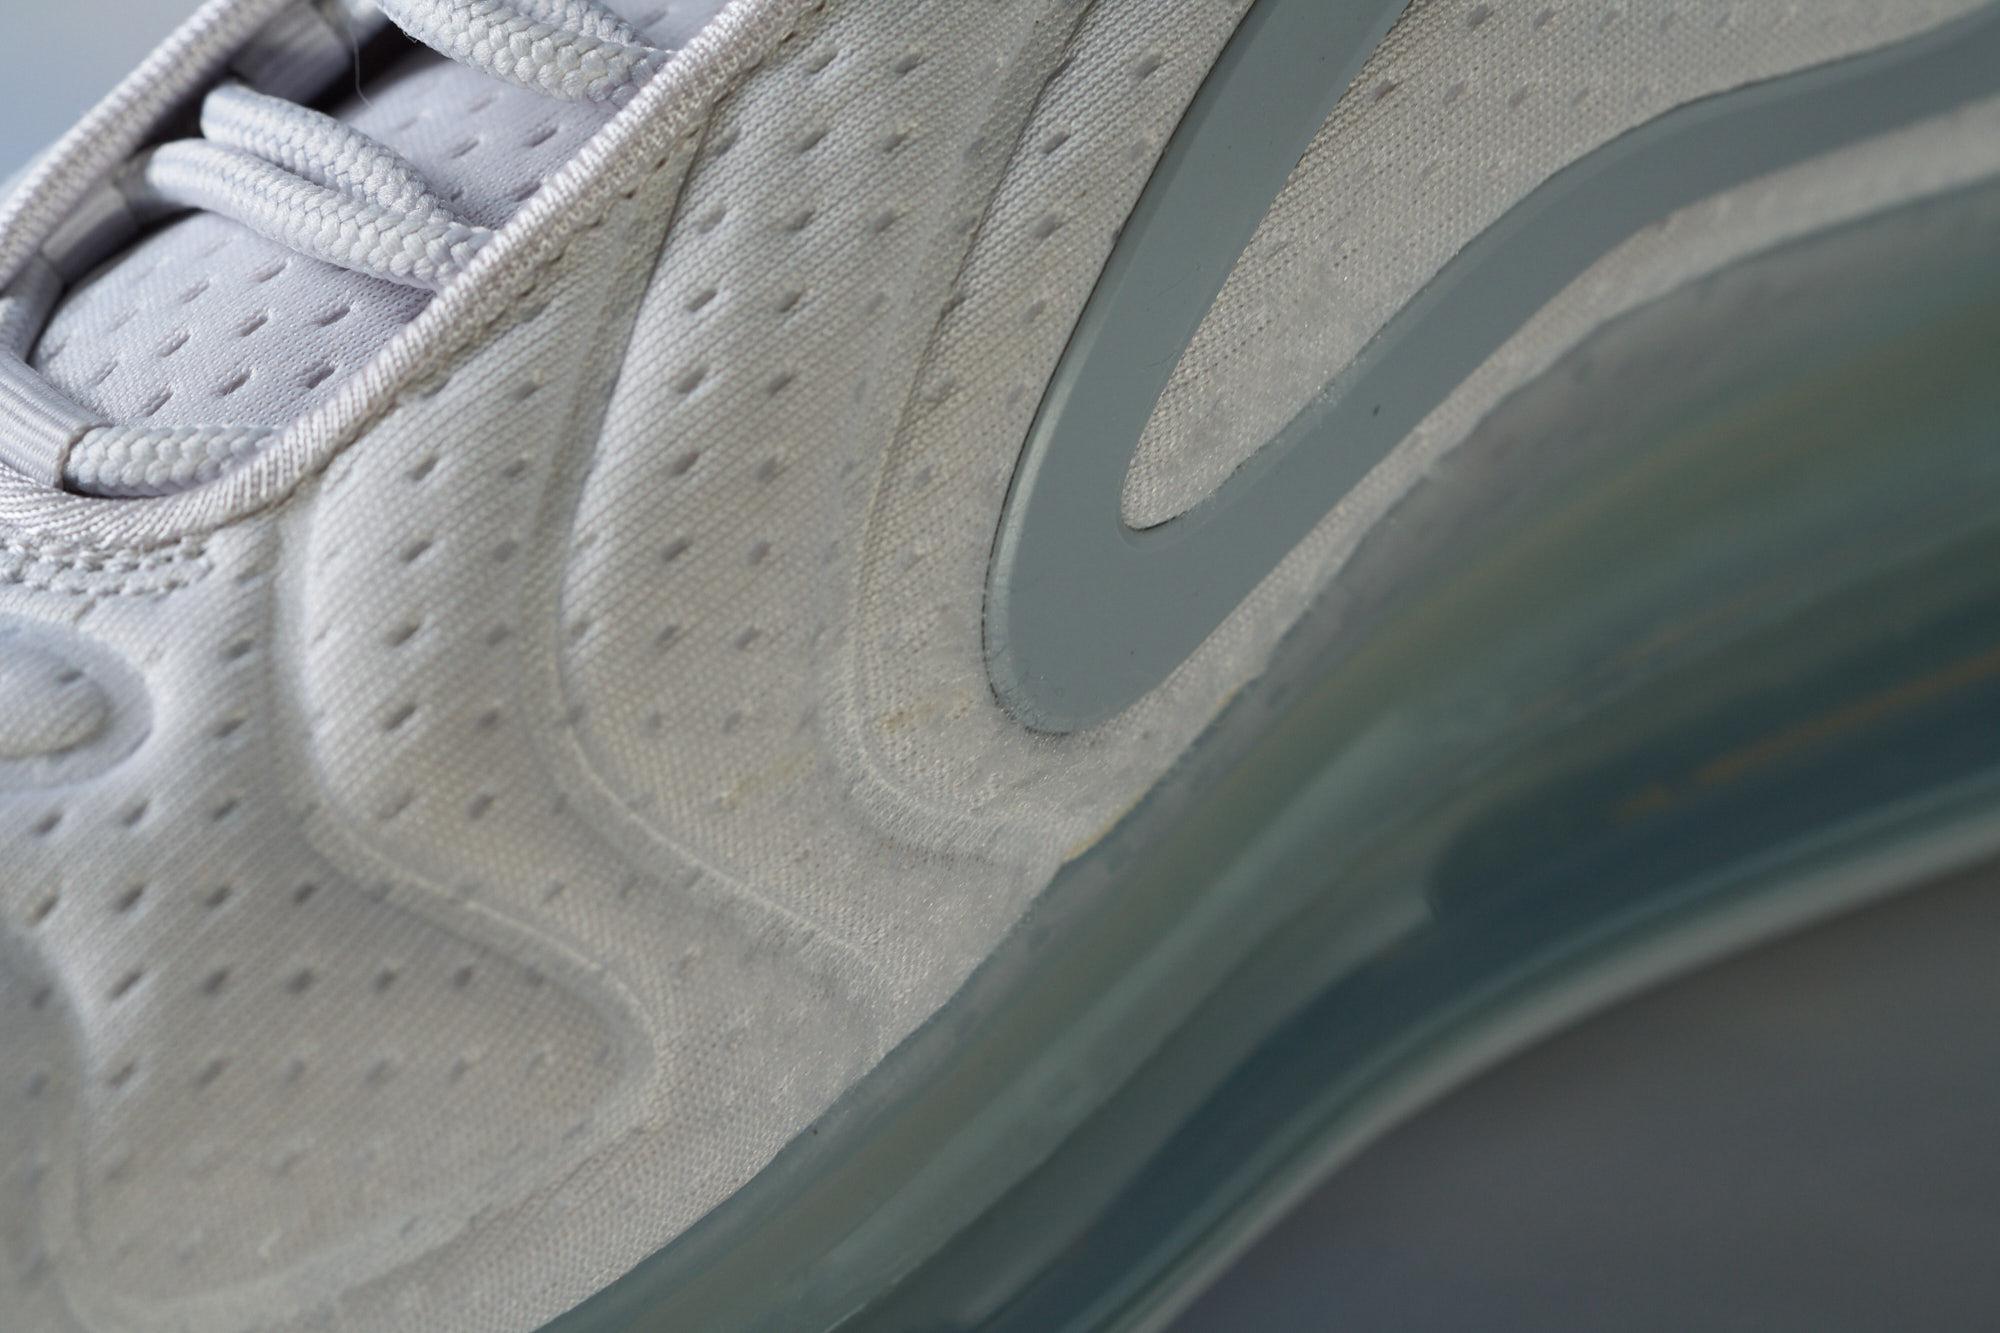 Nike Air Max 720 Review, Facts, Comparison